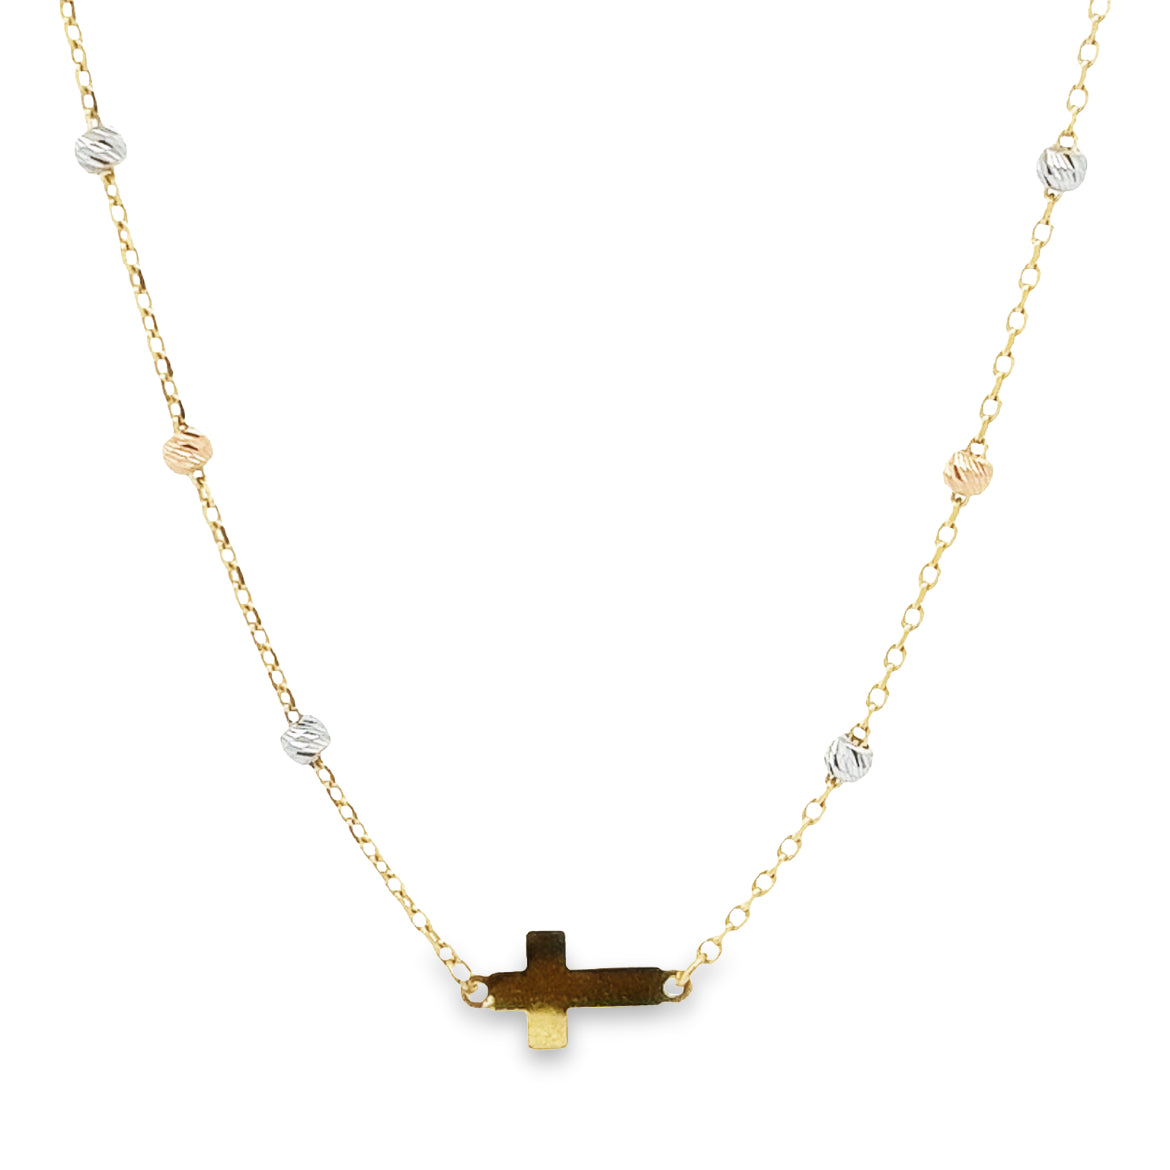 14K YELLOW, WHITE AND ROSE GOLD CROSS NECKLACE